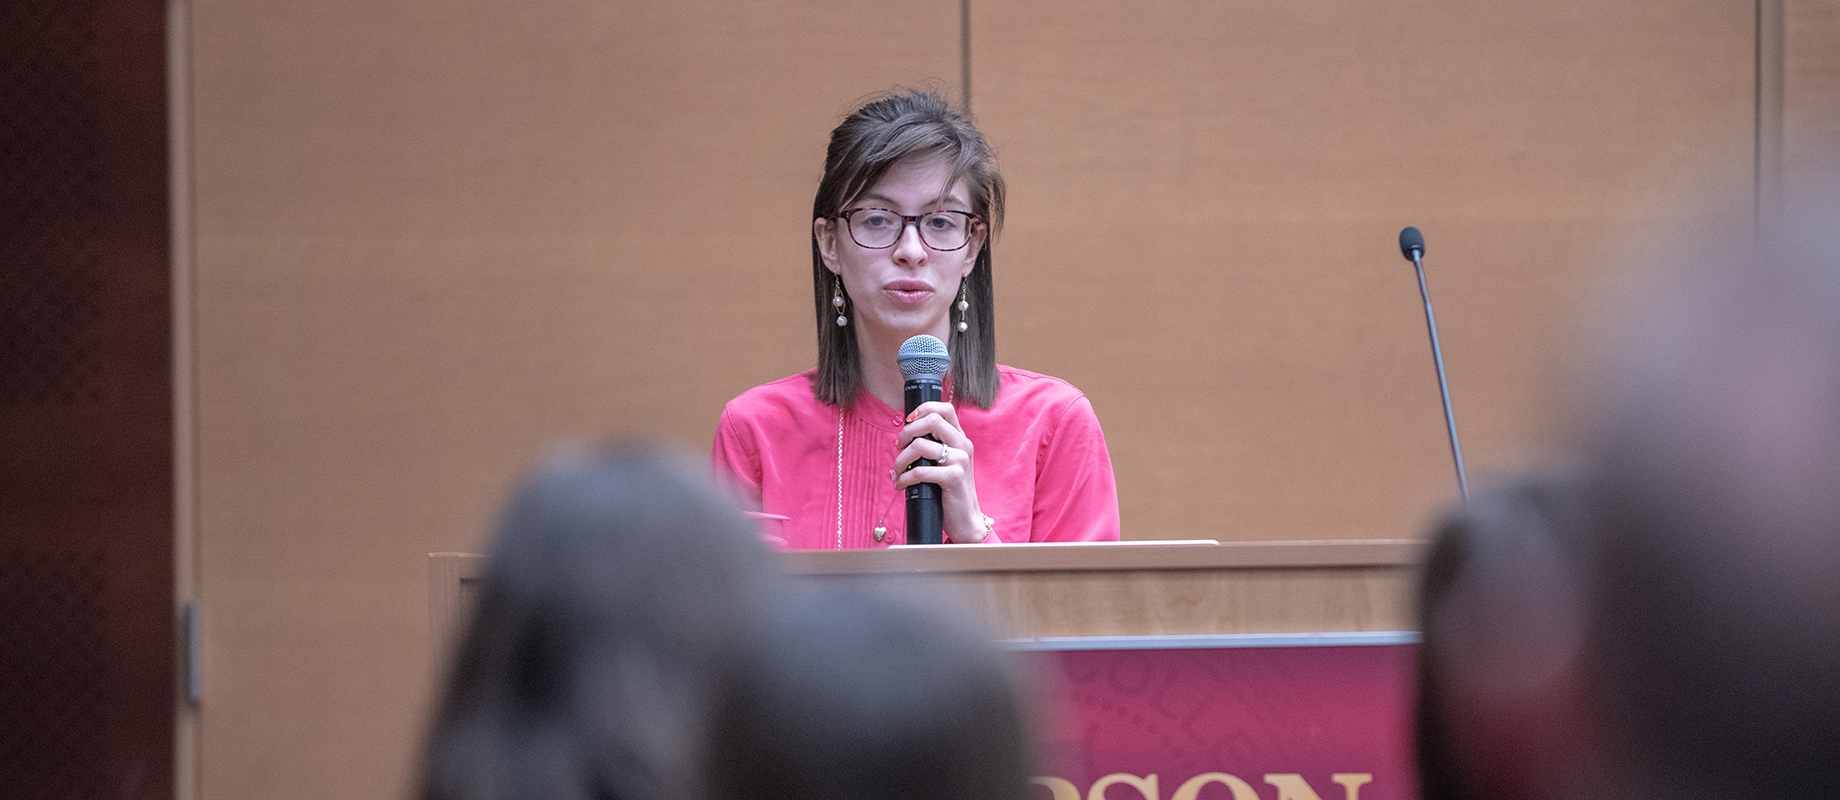 Lydia Magalhaes gives a presentation at the 2019 Midwest Undergraduate Mathematics Symposium held at Simpson on Saturday, April 13.